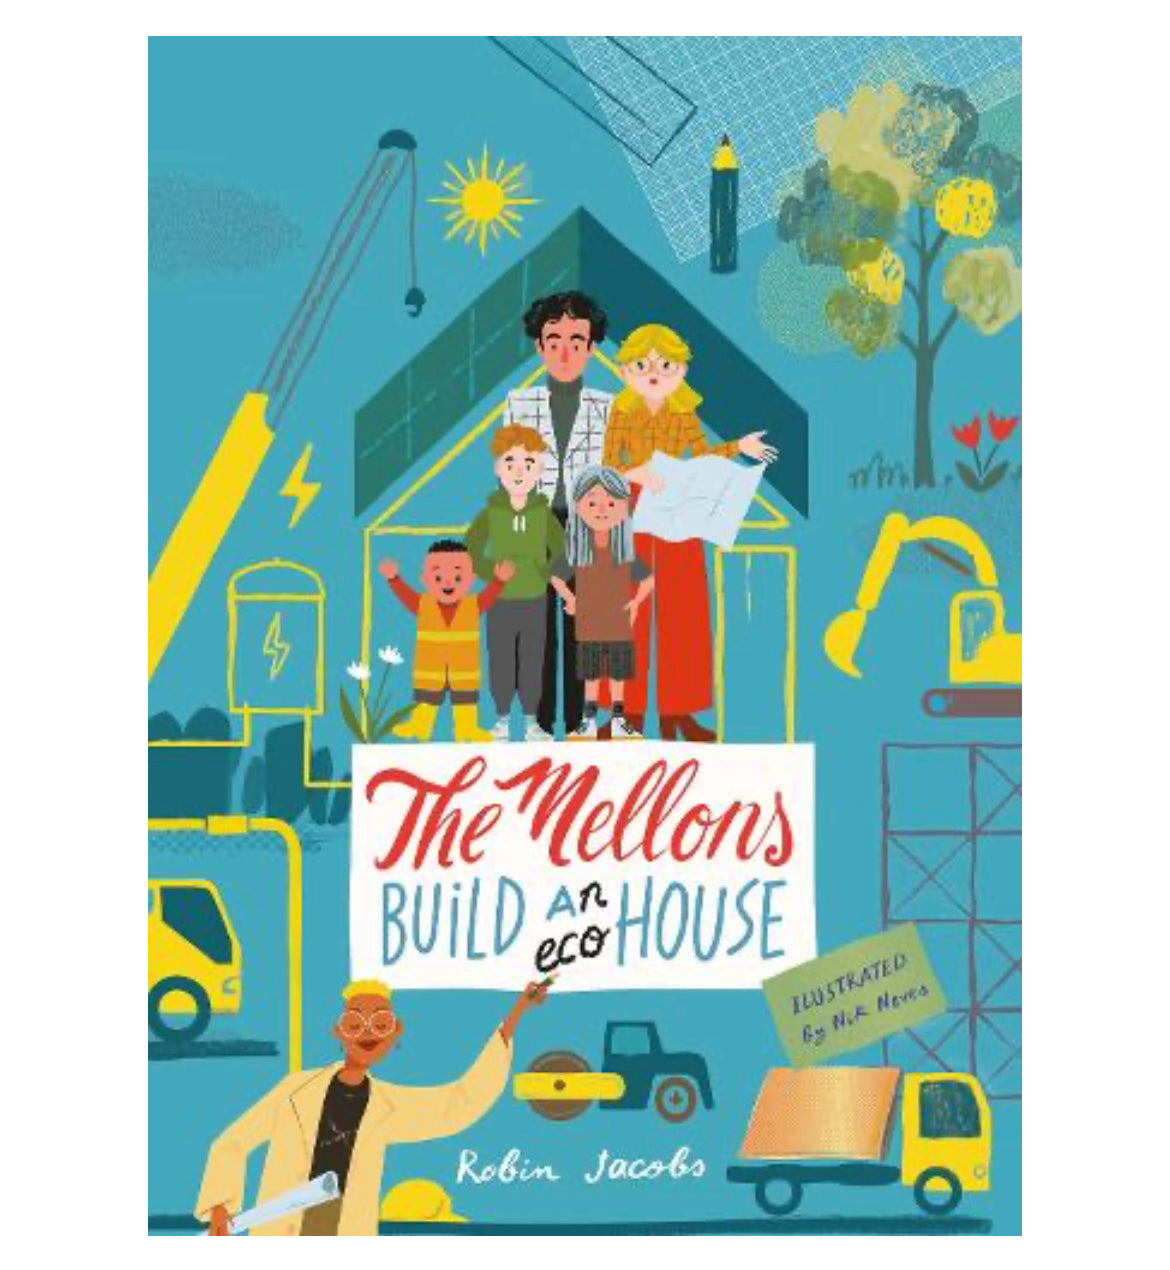 The Mellons Build a House